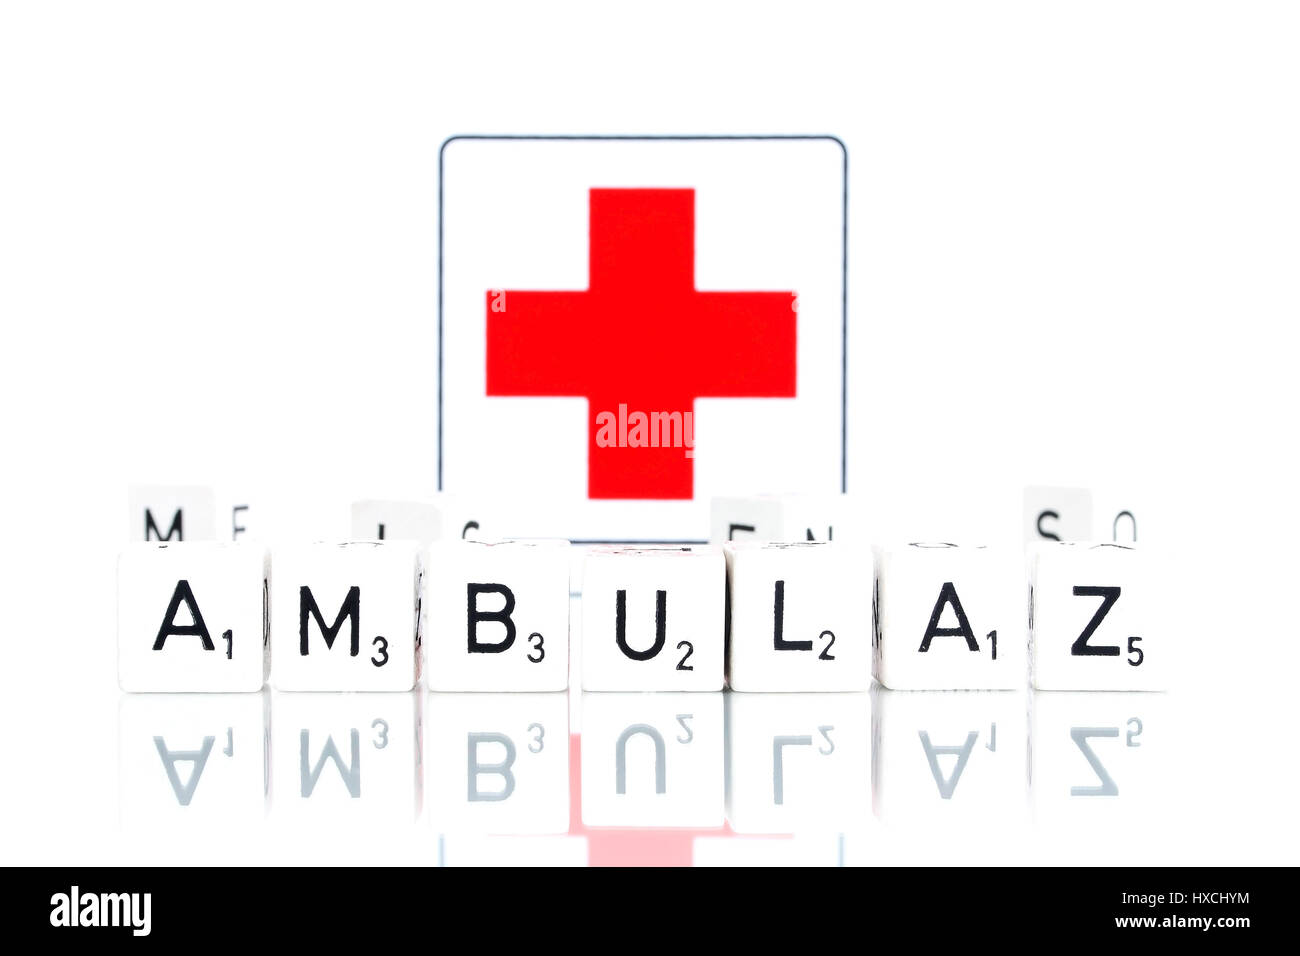 Outpatient clinic, Ambulanz Stock Photo